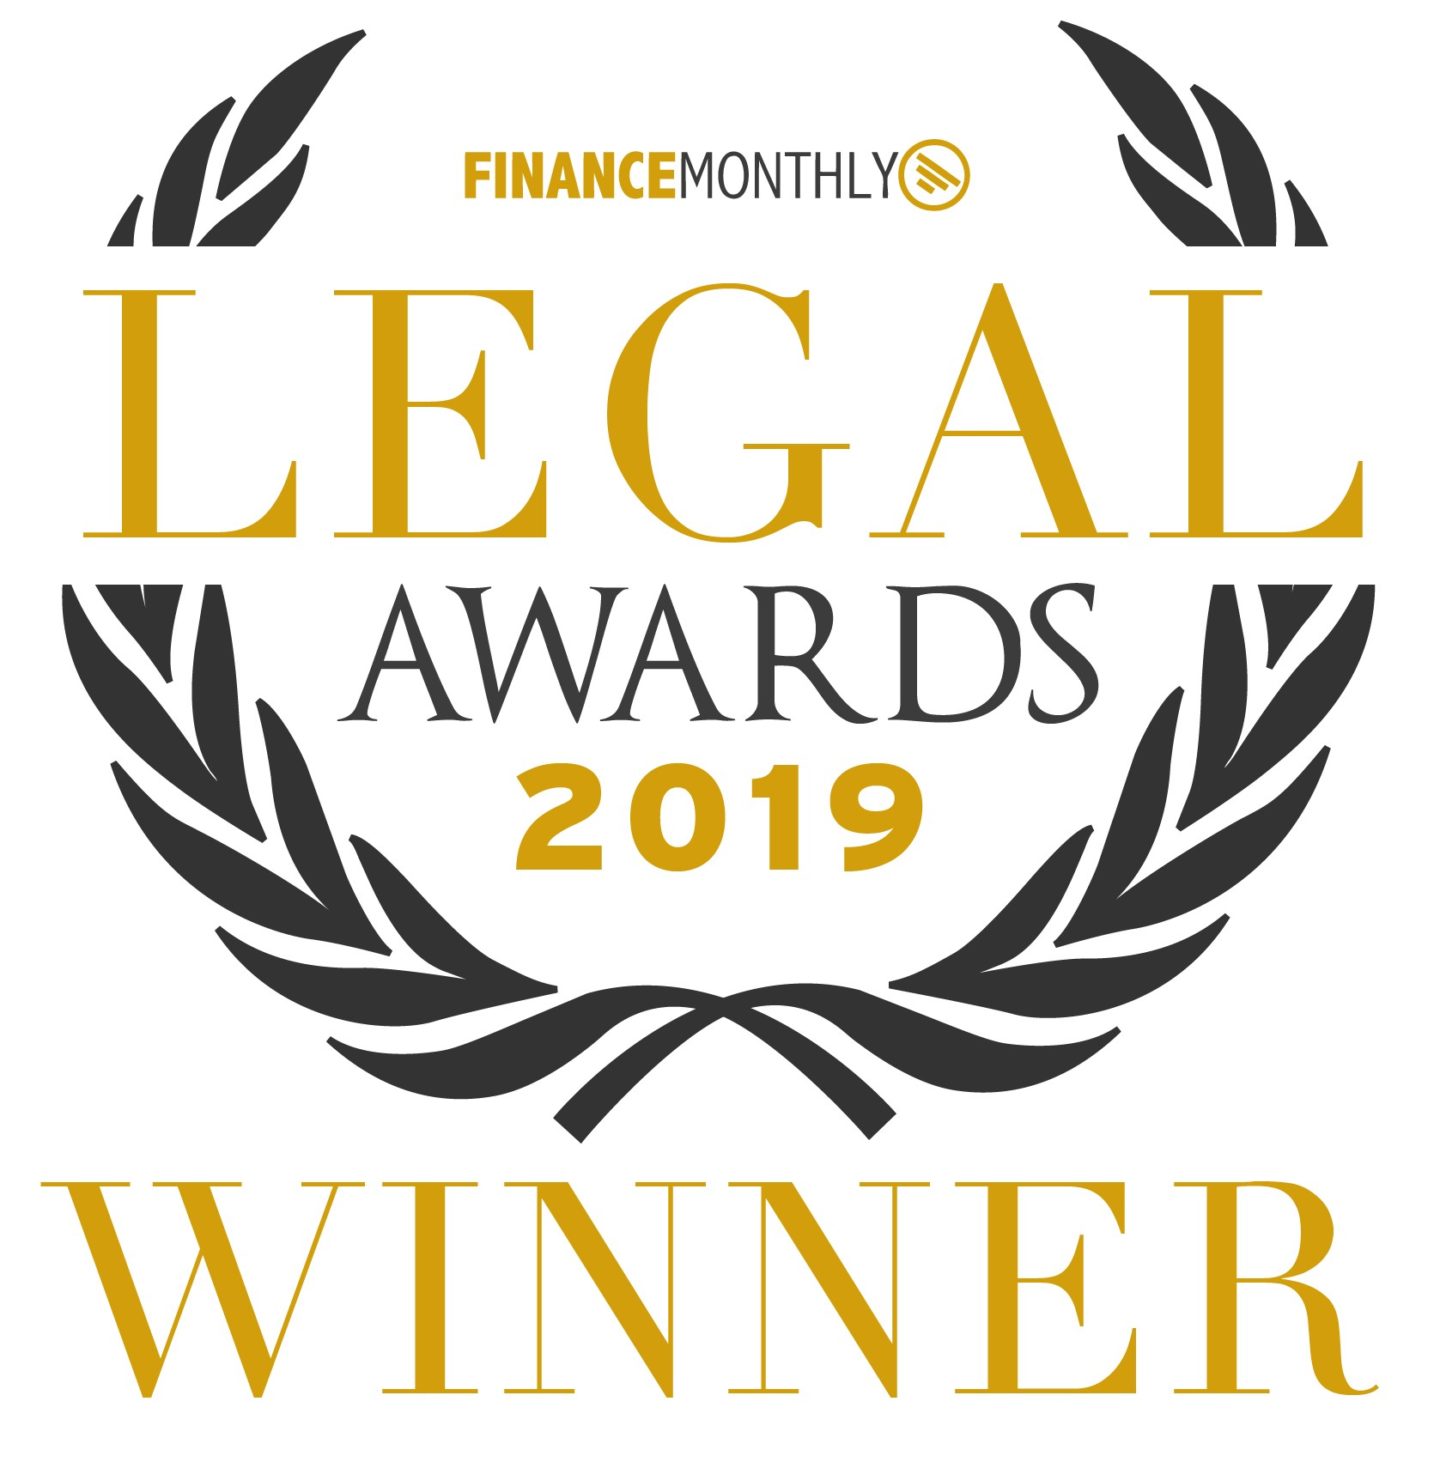 Finance Monthly Legal Awards 2019